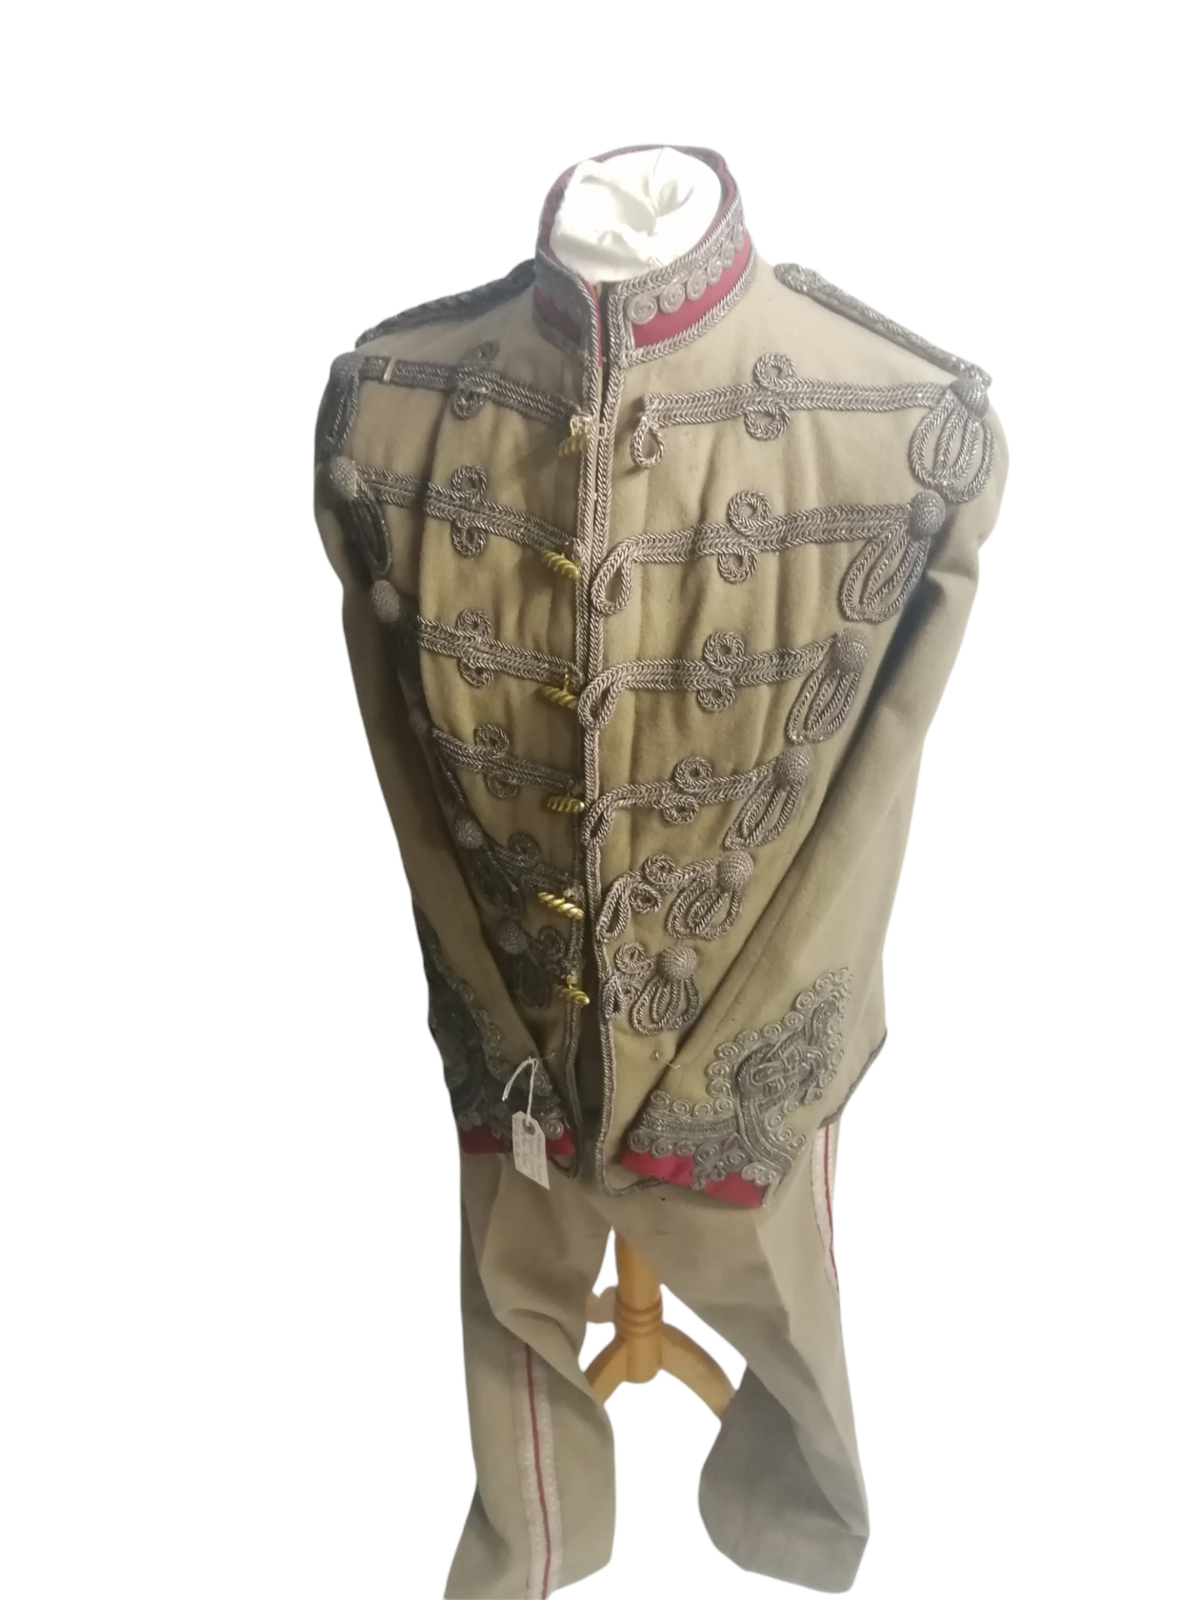 Lancashire Hussars Imperial Yeomanry Officers Full Dress Circa 1903.